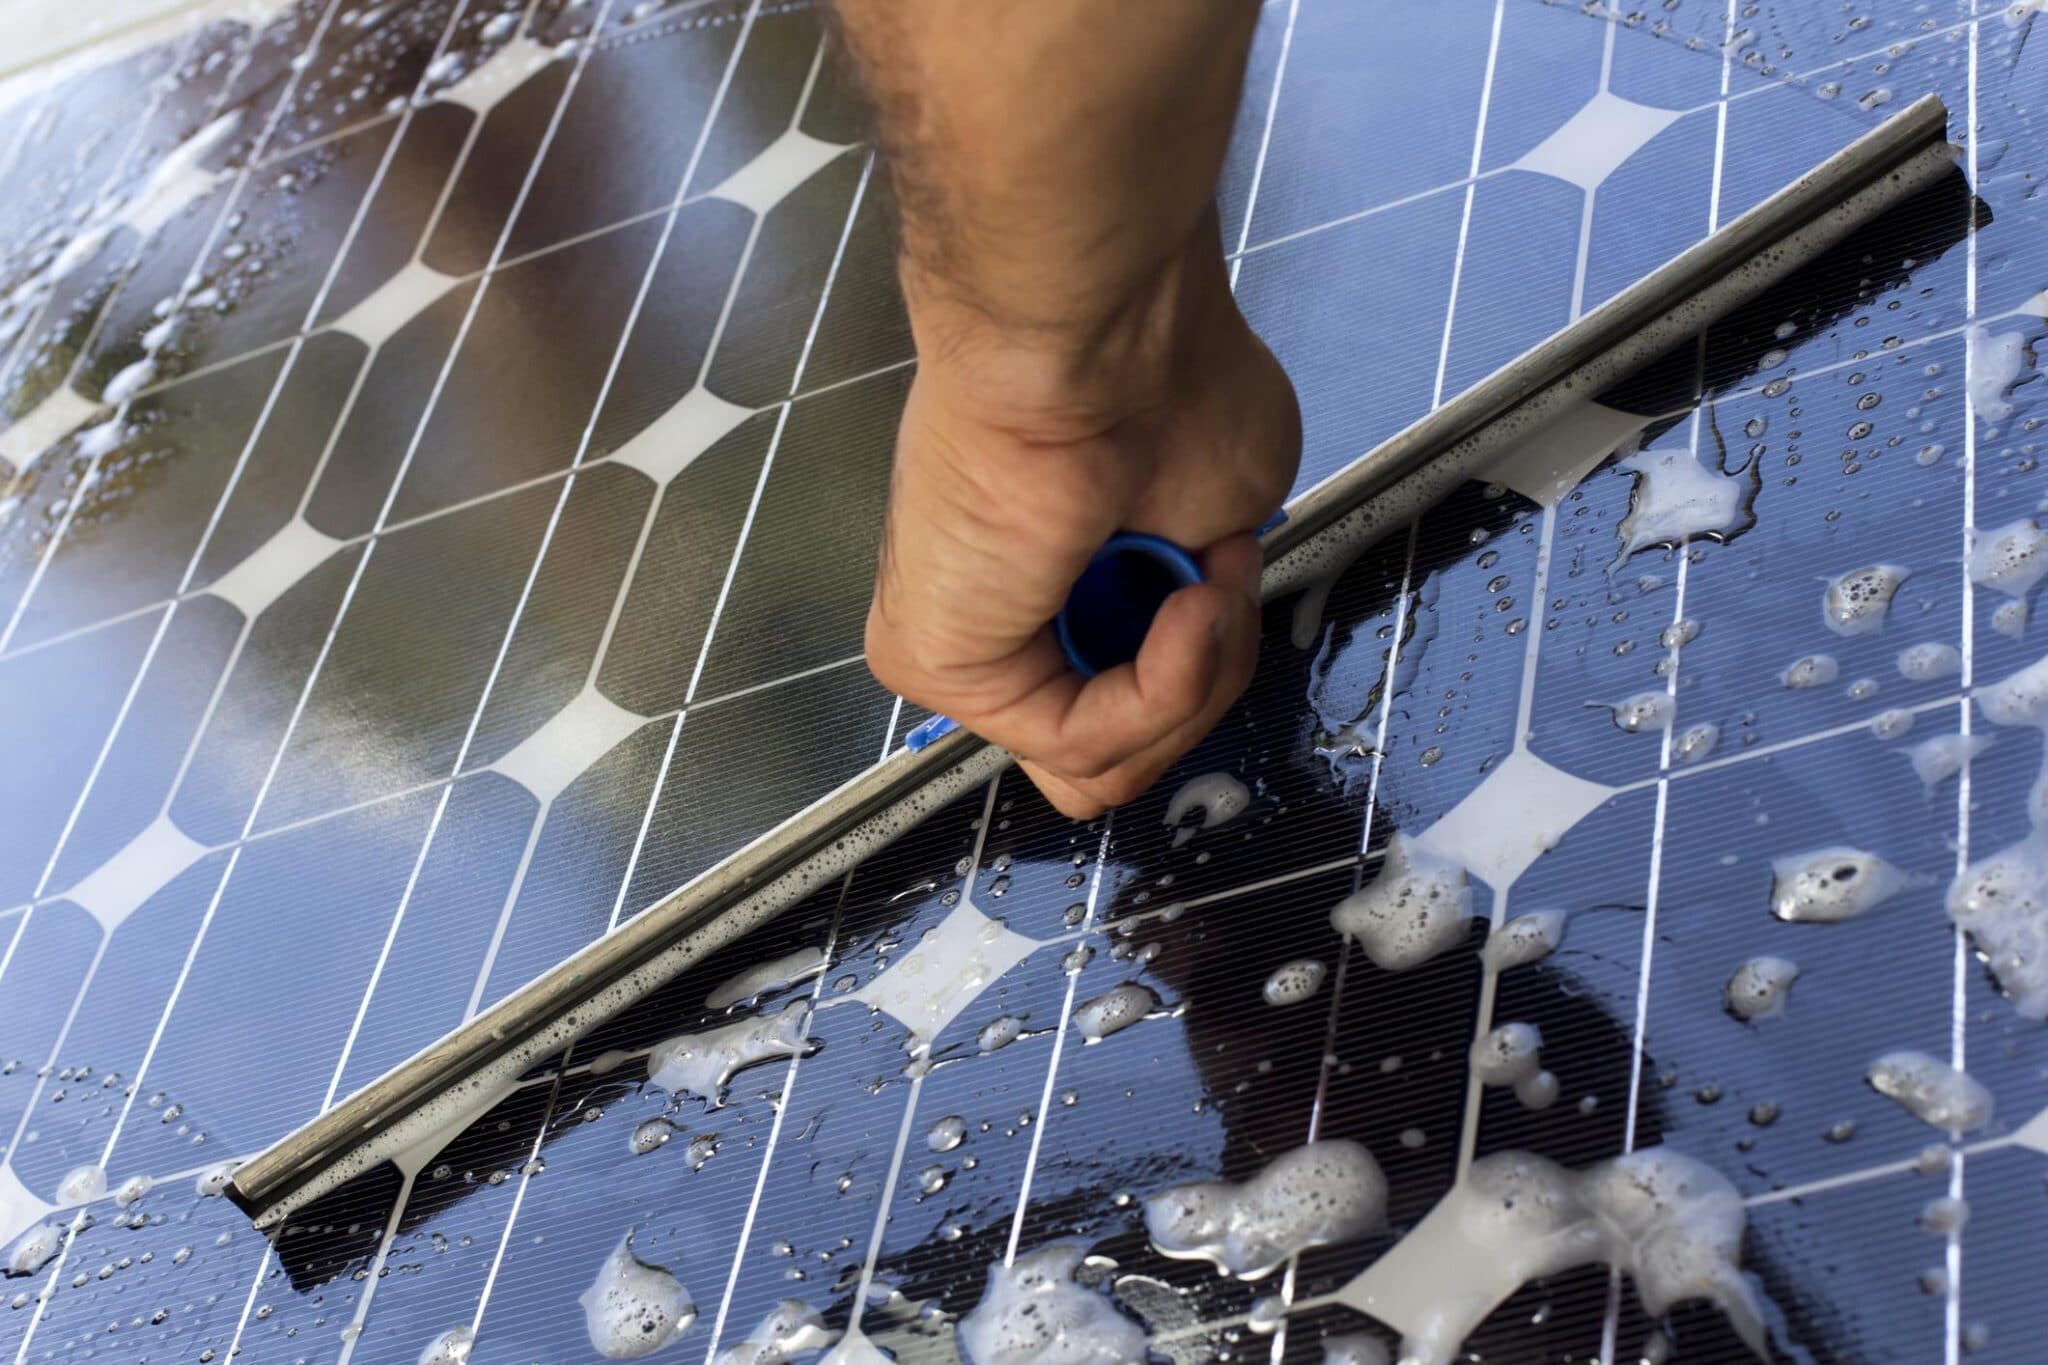 Cleaning solar panels with soapy water and squeegee